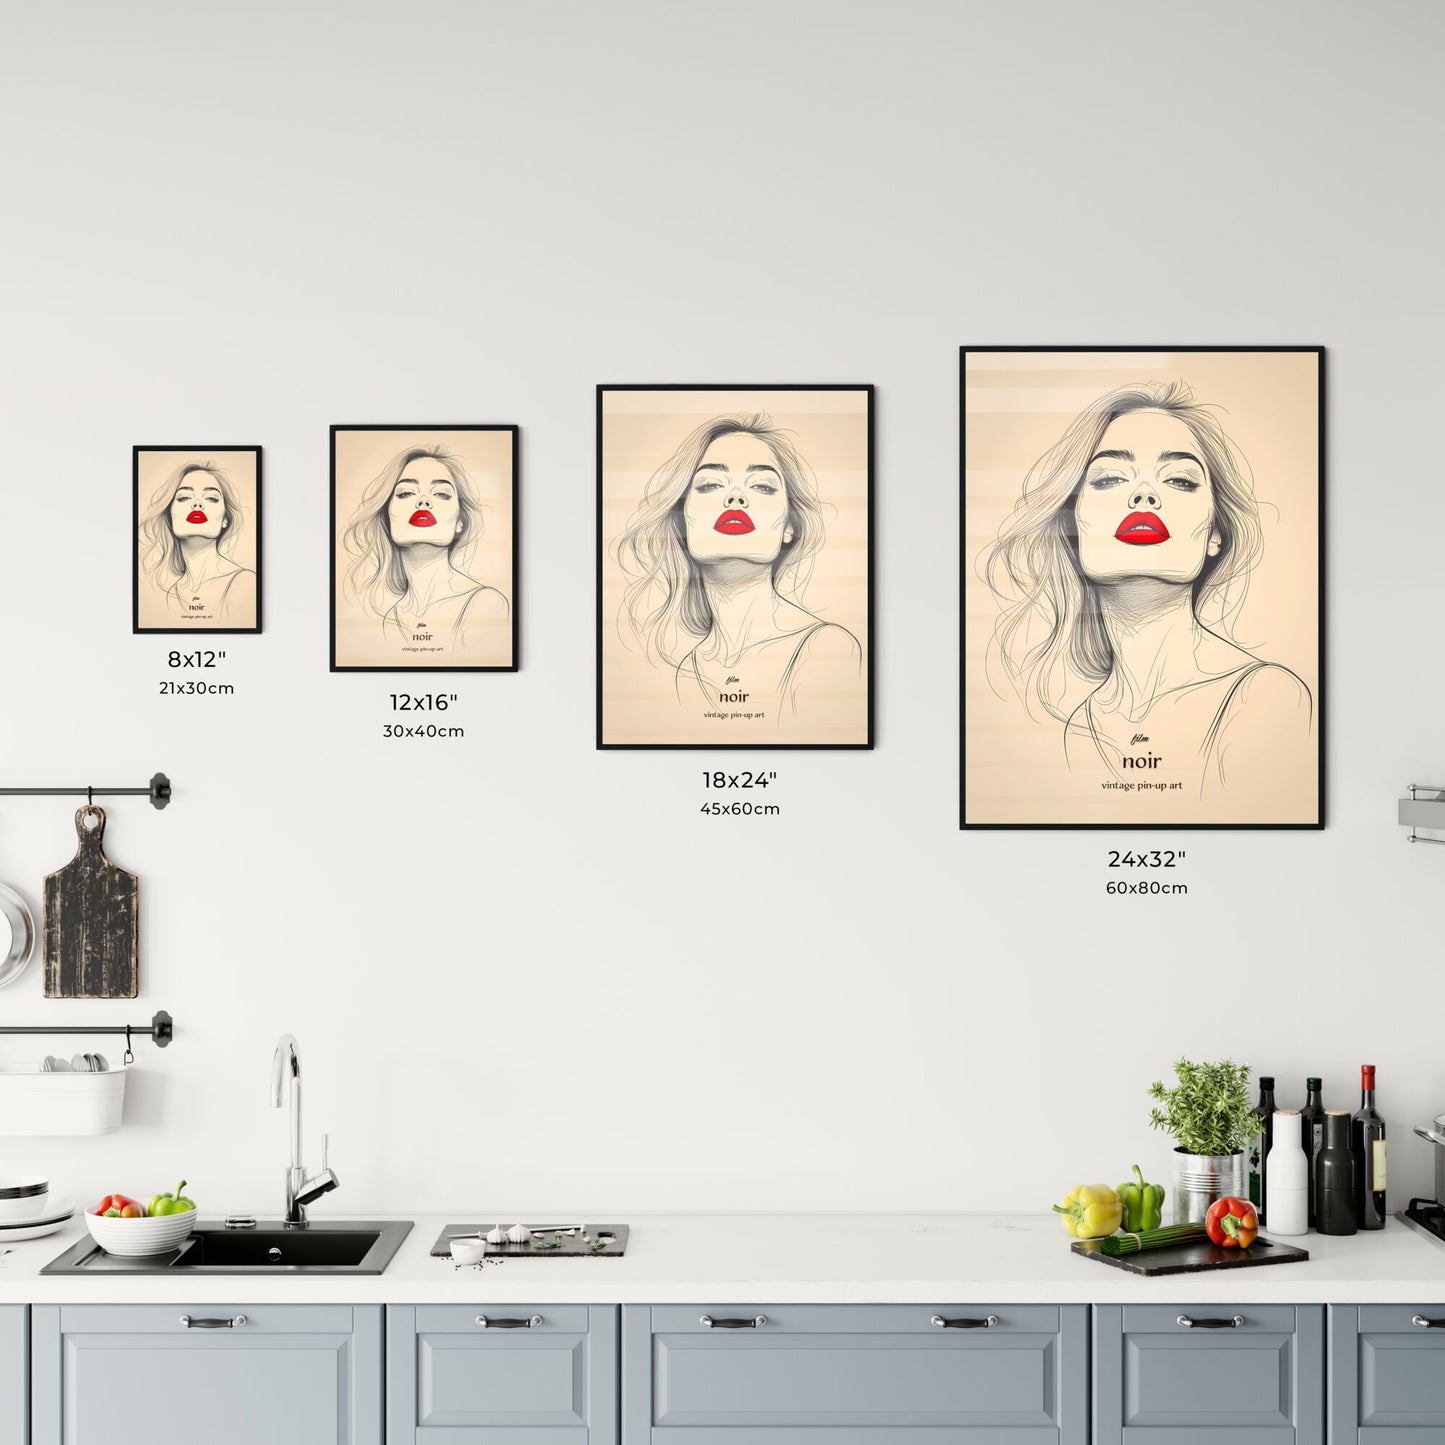 film, noir, vintage pin-up art, A Poster of a woman with red lips Default Title